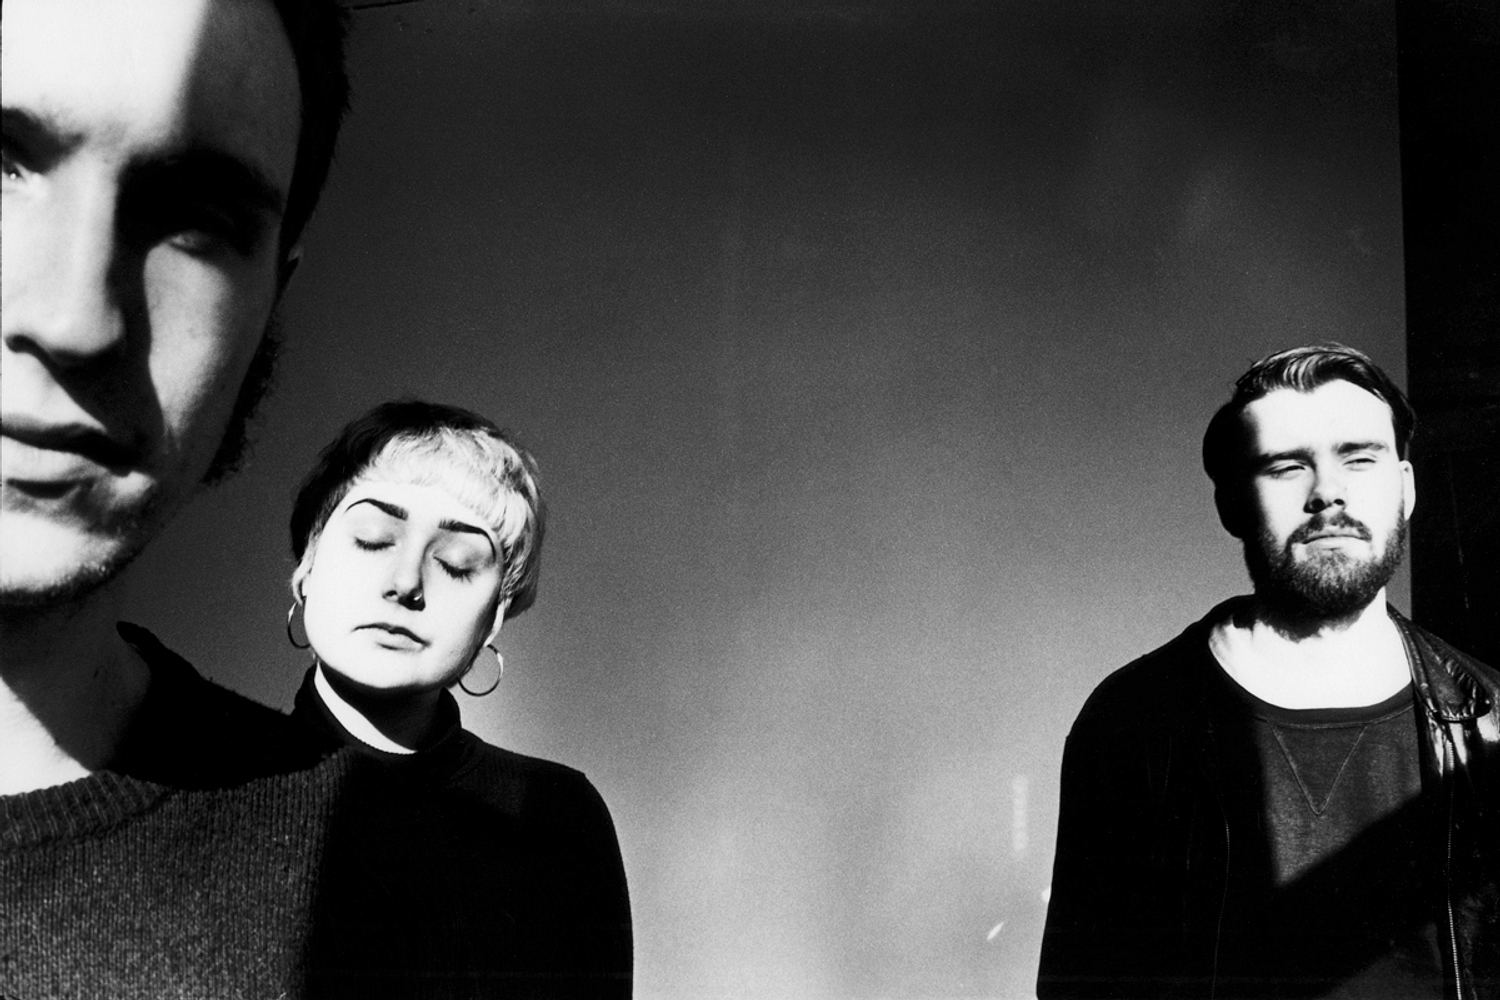 Kagoule show off their heavier side with new track ‘Pharmacy’